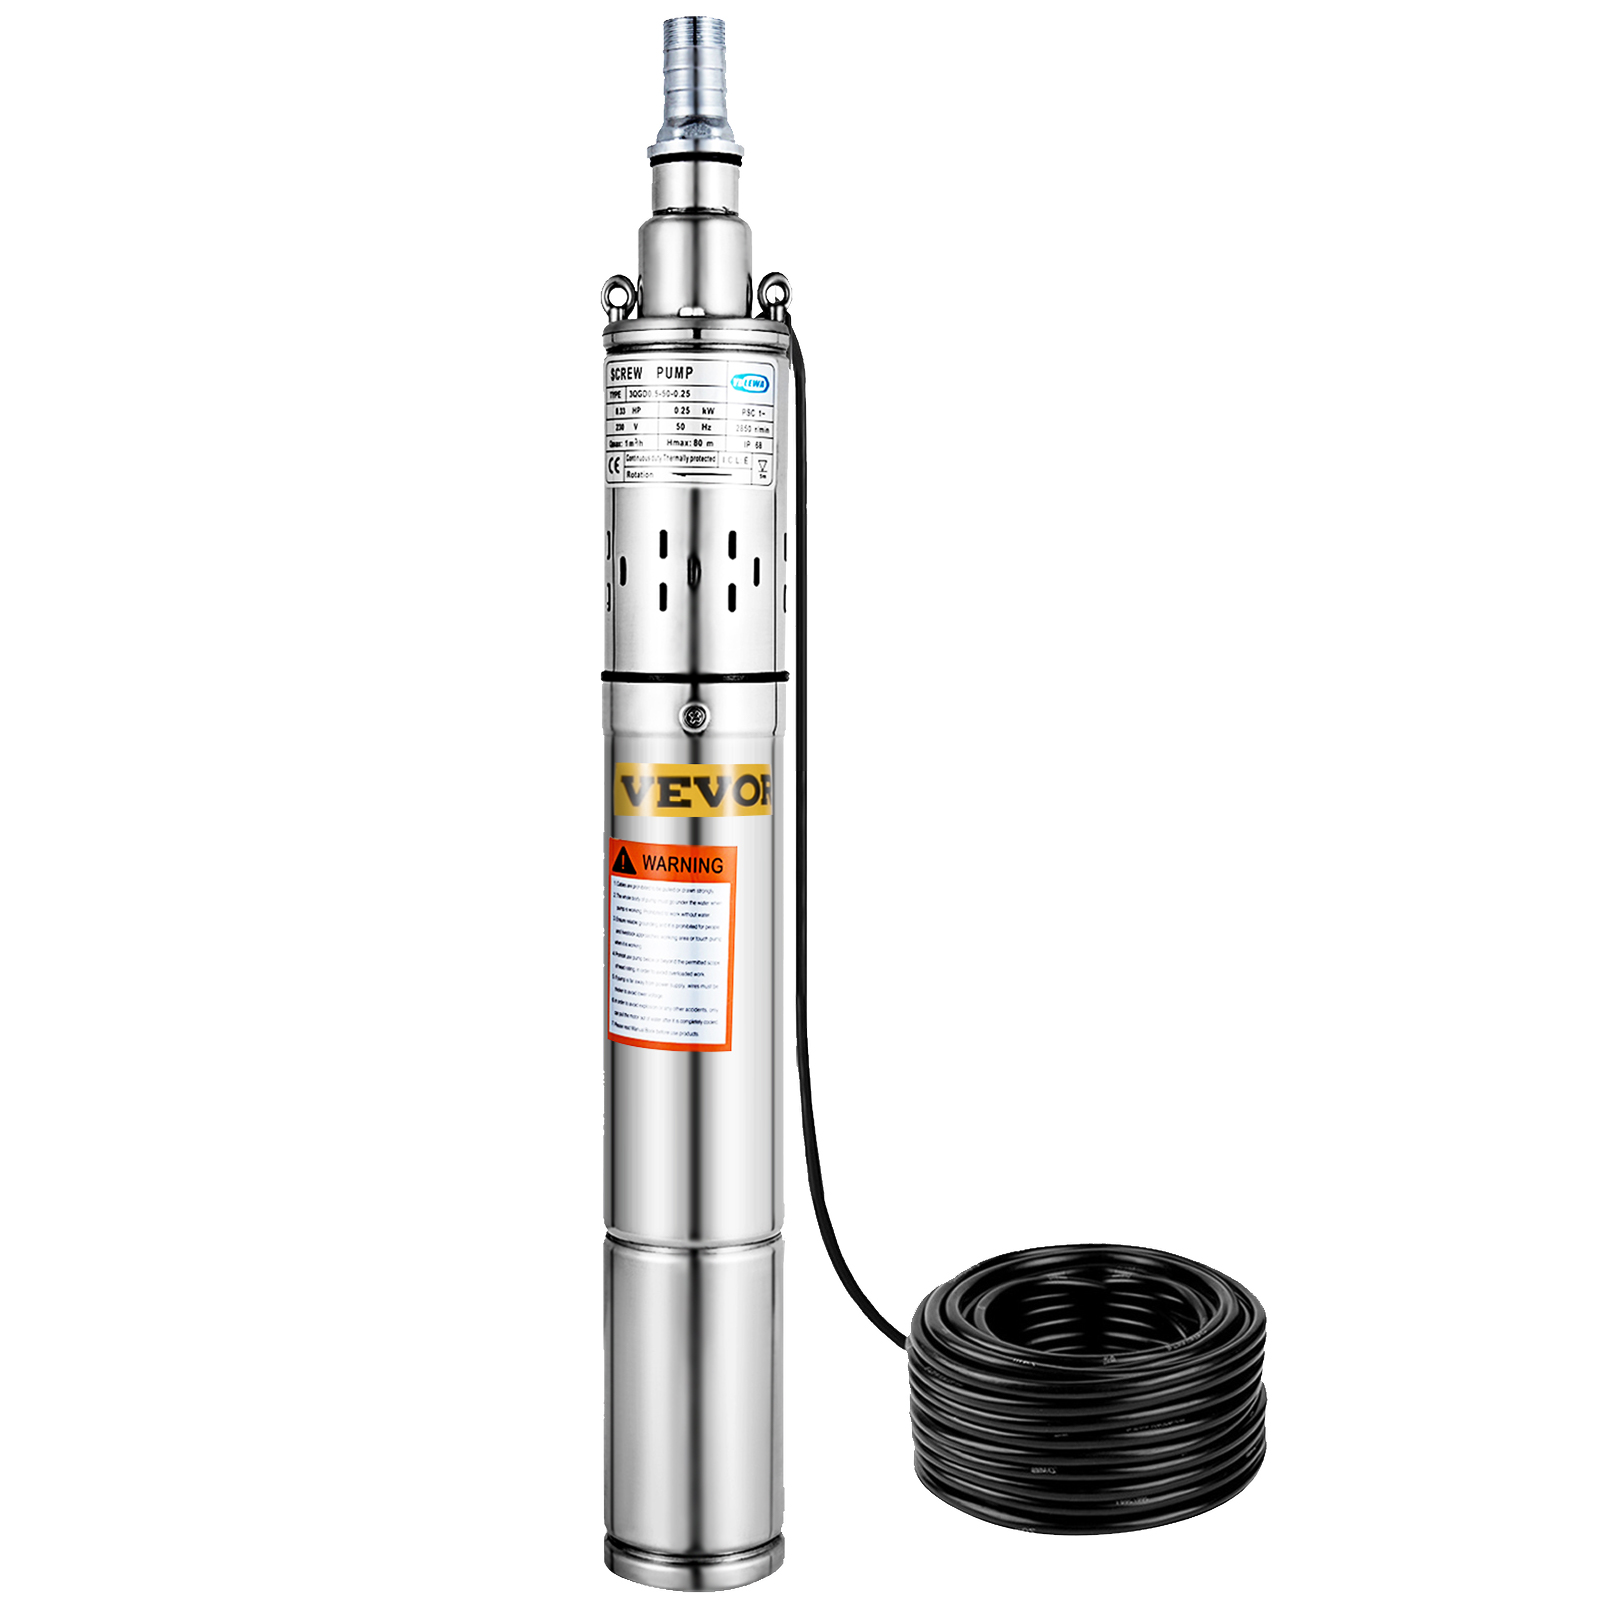 VEVOR Stainless Steel Submersible Well Pump 220V Submersible Pump For ...